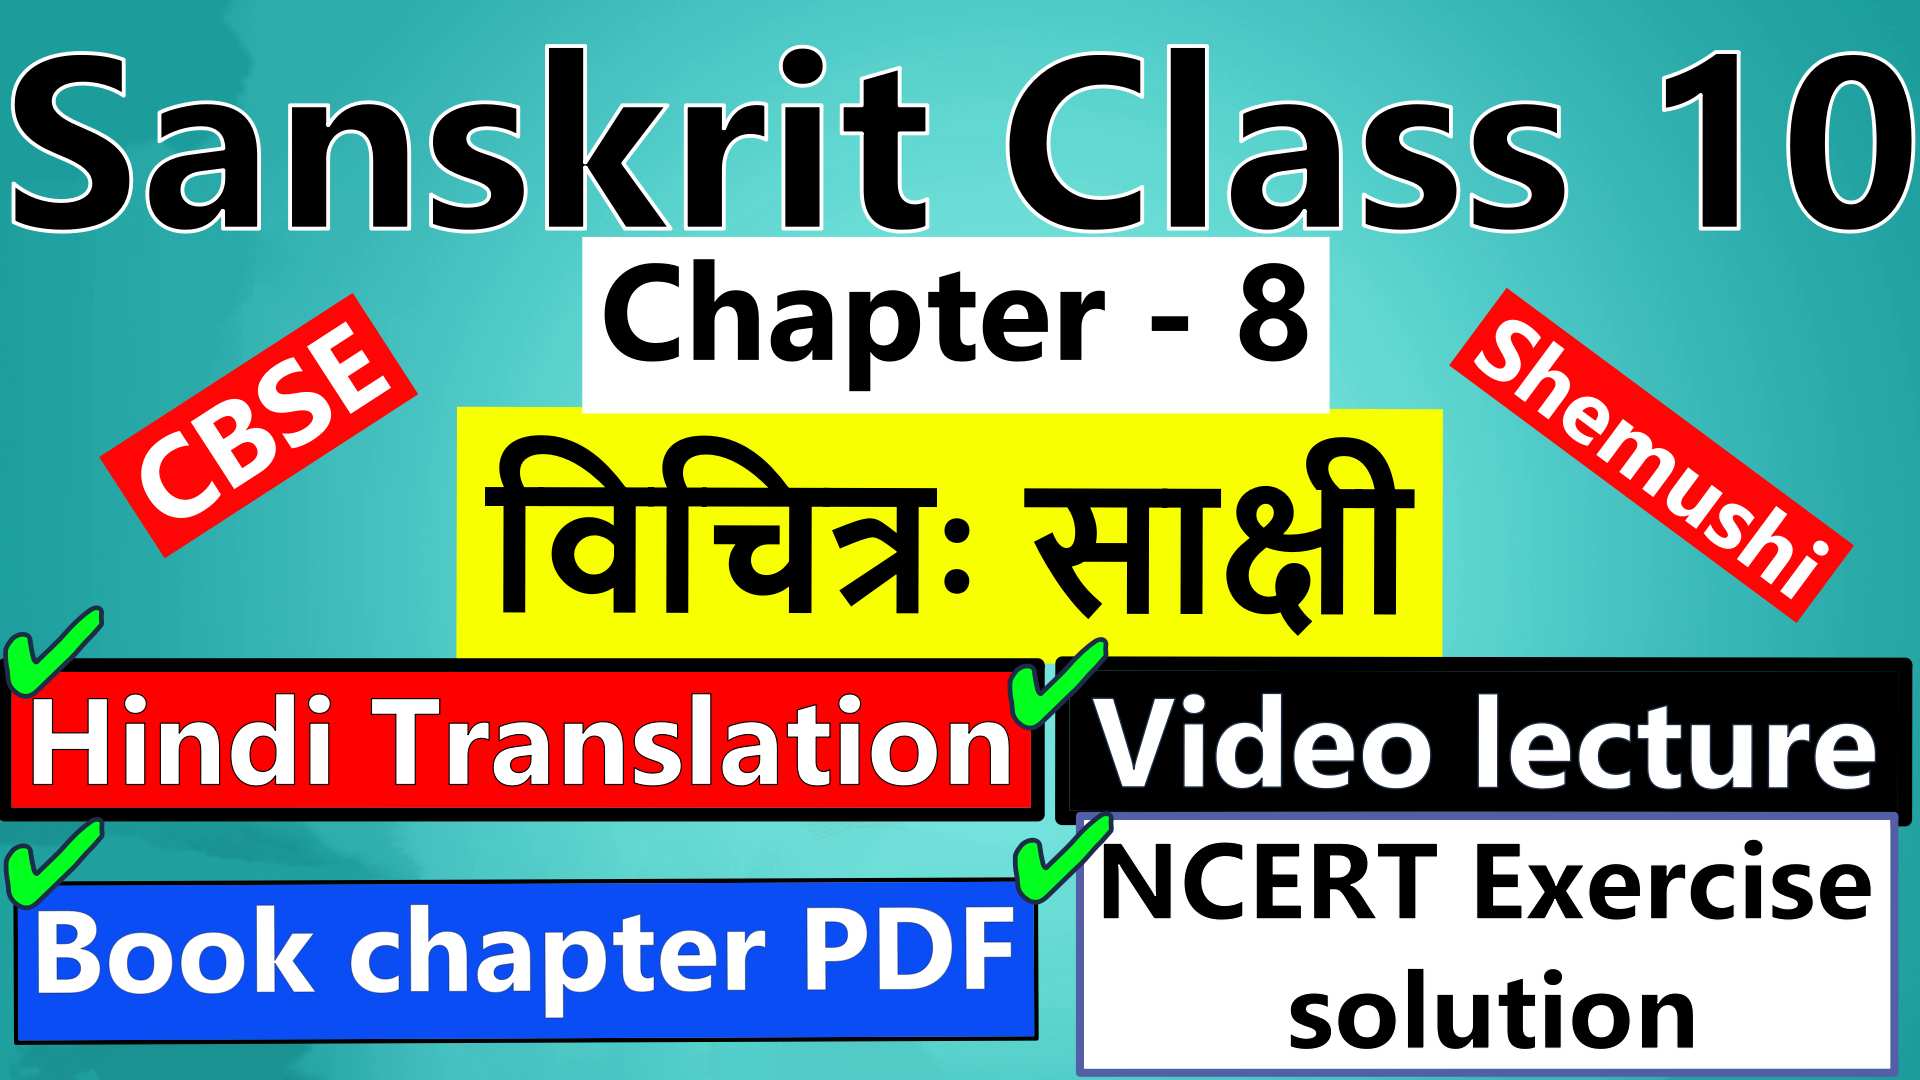 sanskrit-class-10-chapter-8-विचित्रः-साक्षी-Hindi-Translation-Video-lecture-NCERT-Exercise-Solution-Question-Answer-Book-chapter-PDF